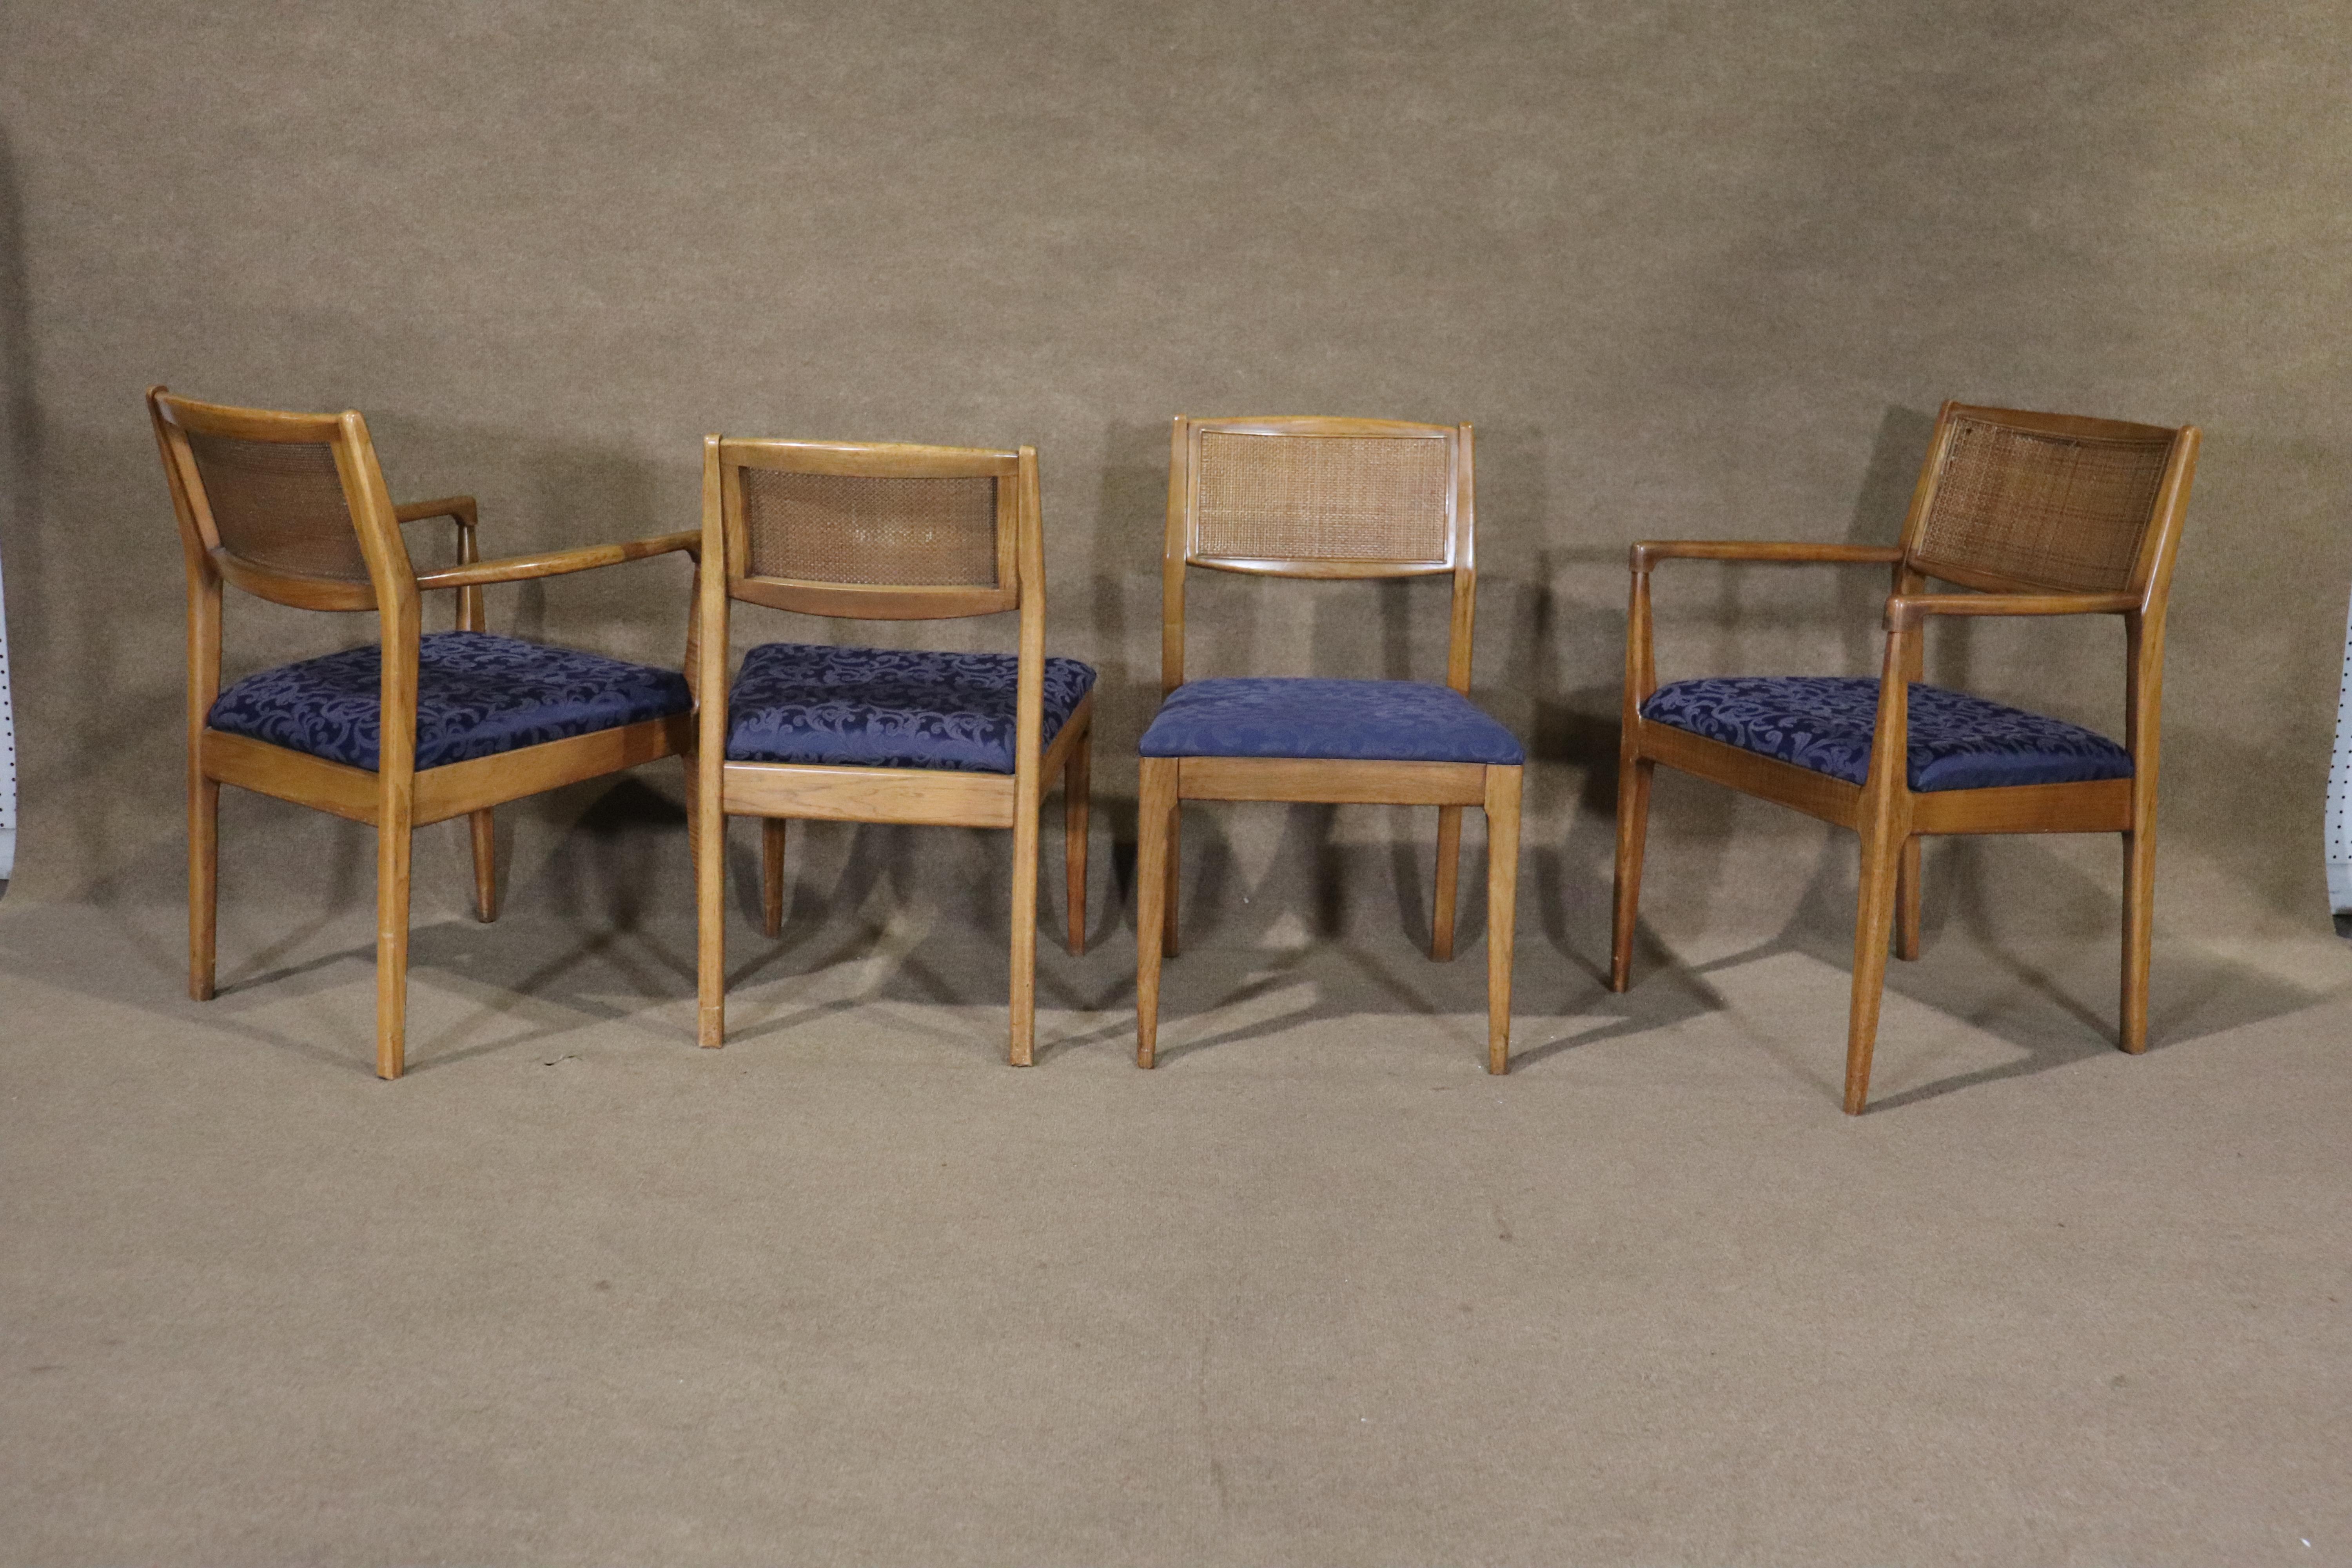 Set of mid-century caned back dining chairs in the style of Jens Risom. Two arm chairs and four side chairs. Slender arms and tapered legs ad a modern feel to your dining room.
Arm chairs: 33